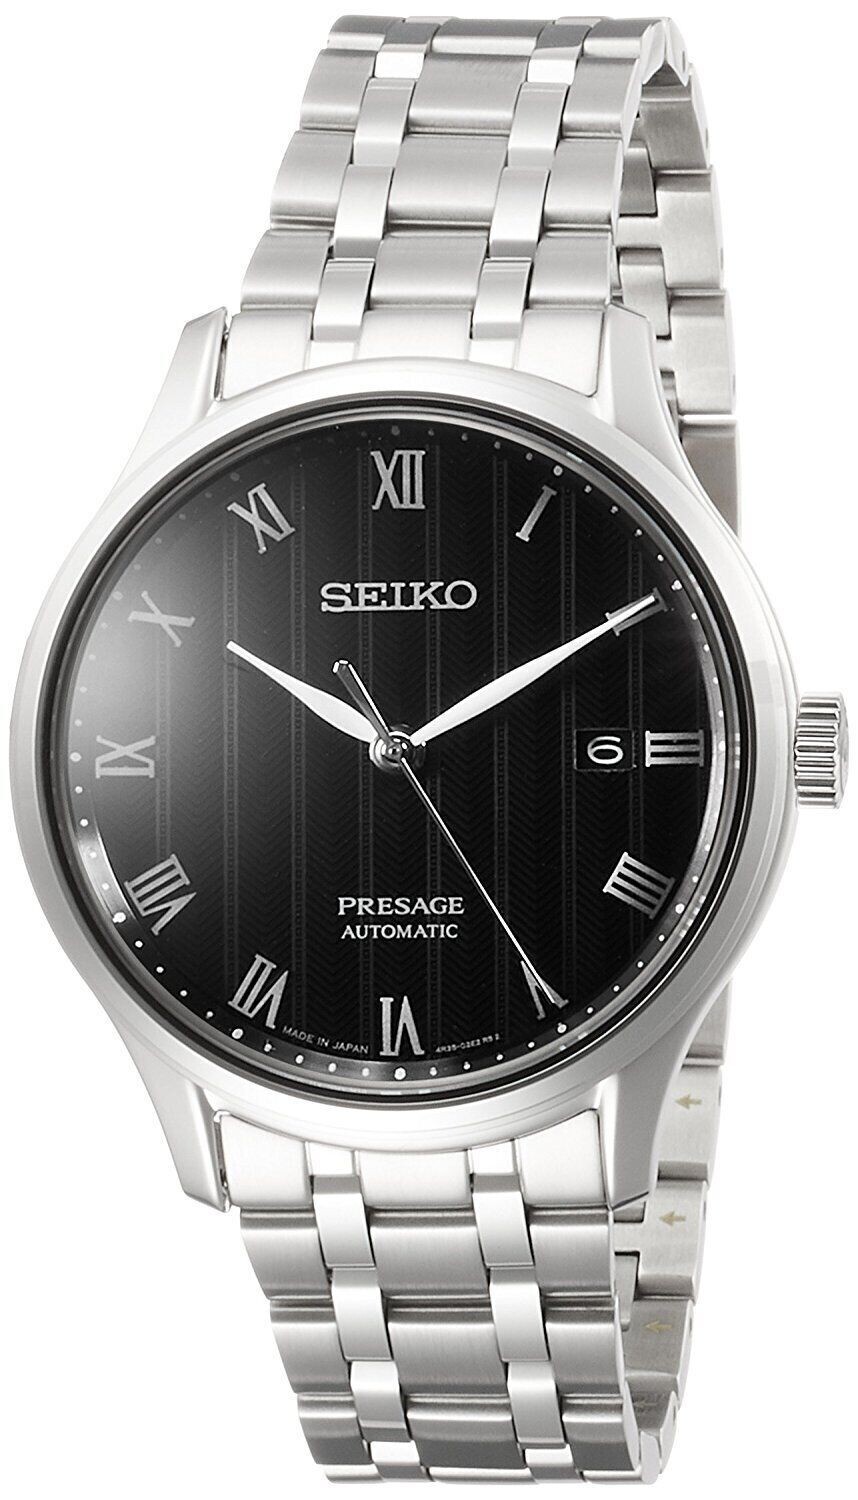 Seiko Presage SARY099 41.7mm automatic men's watch Sapphire crystal stainless steel bracelet 30m WR anti-magnetic resistance